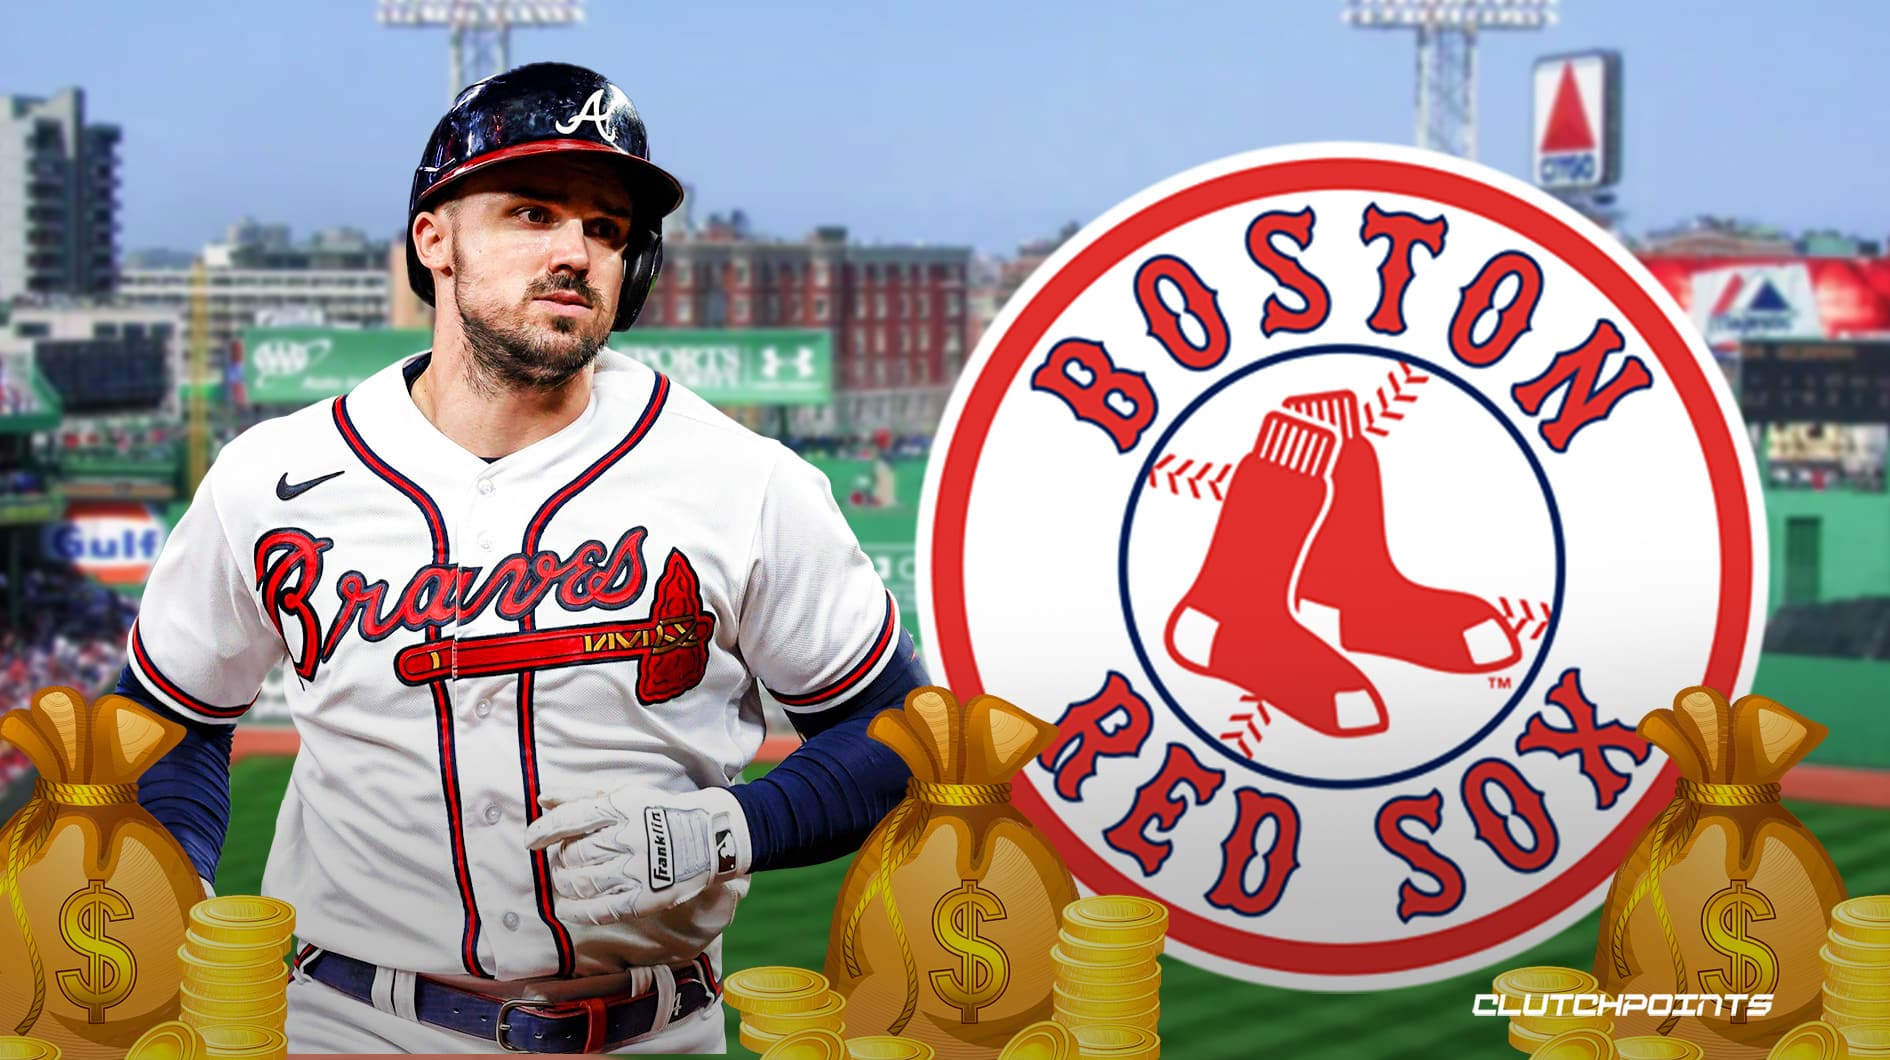 Report: OF Adam Duvall agrees to one-year, $7 million contract with Red Sox